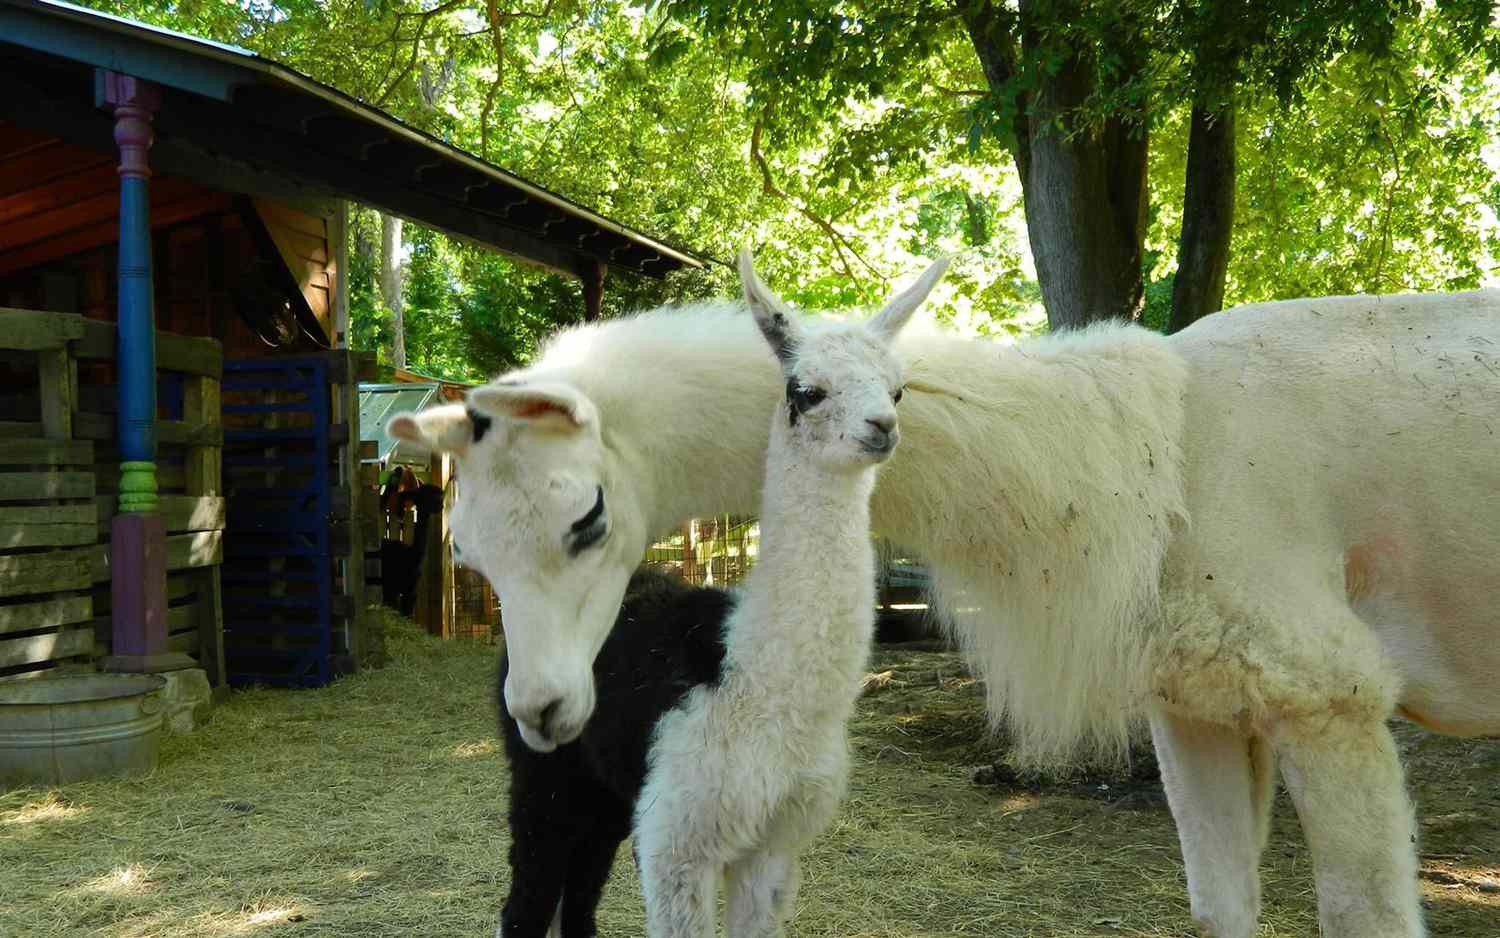 Wake up in a Bamboo Forest and Play With Llamas at This Atlanta Airbnb